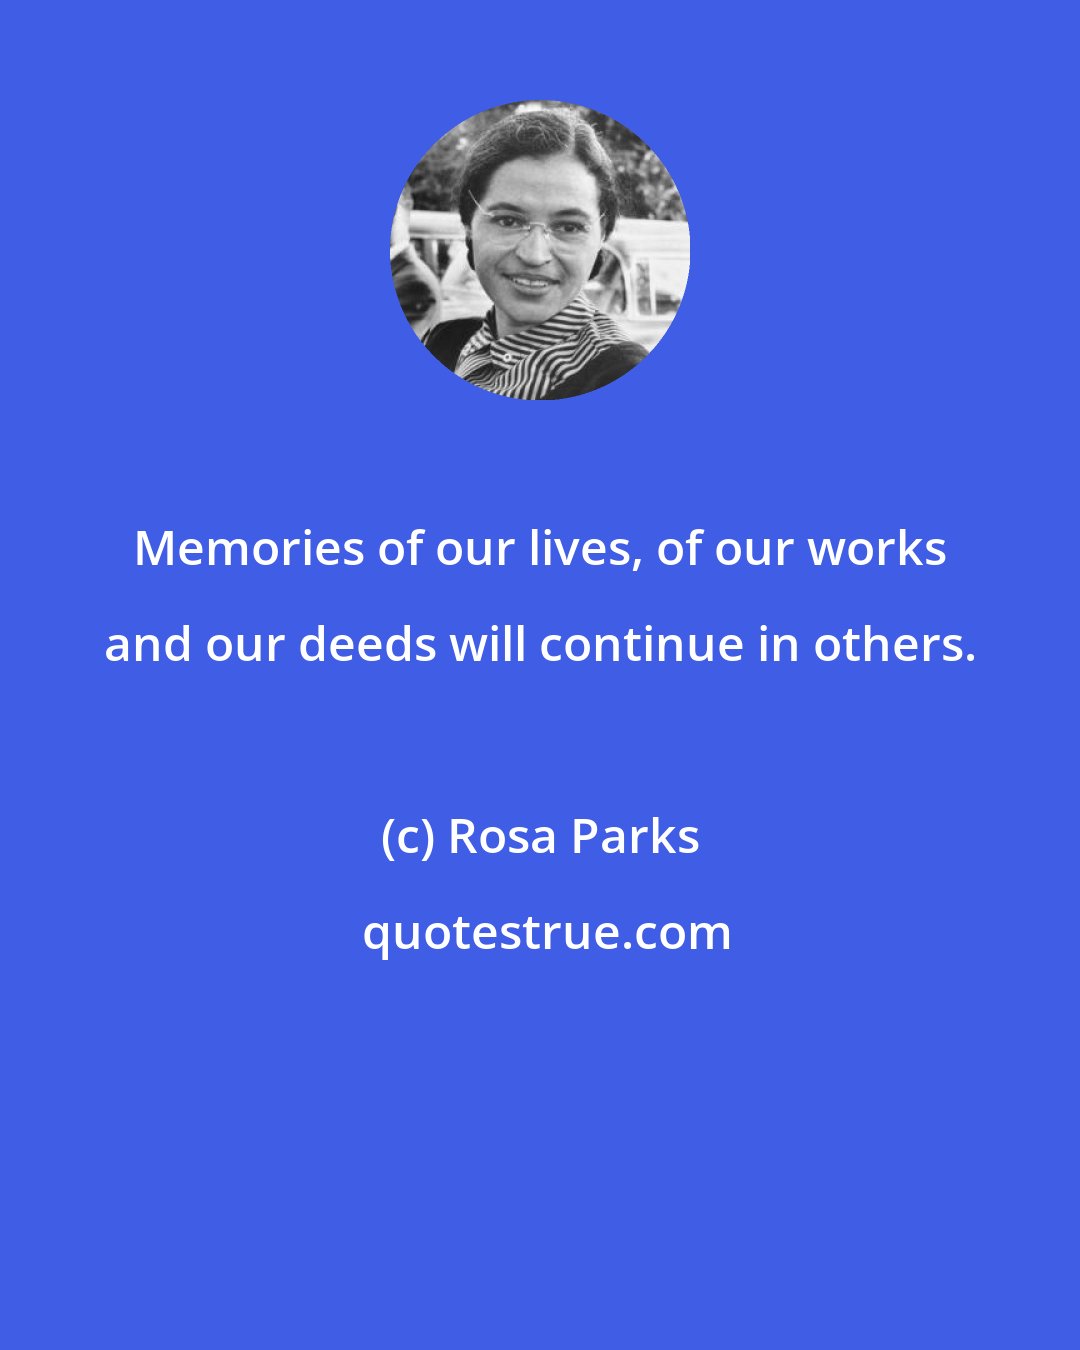 Rosa Parks: Memories of our lives, of our works and our deeds will continue in others.